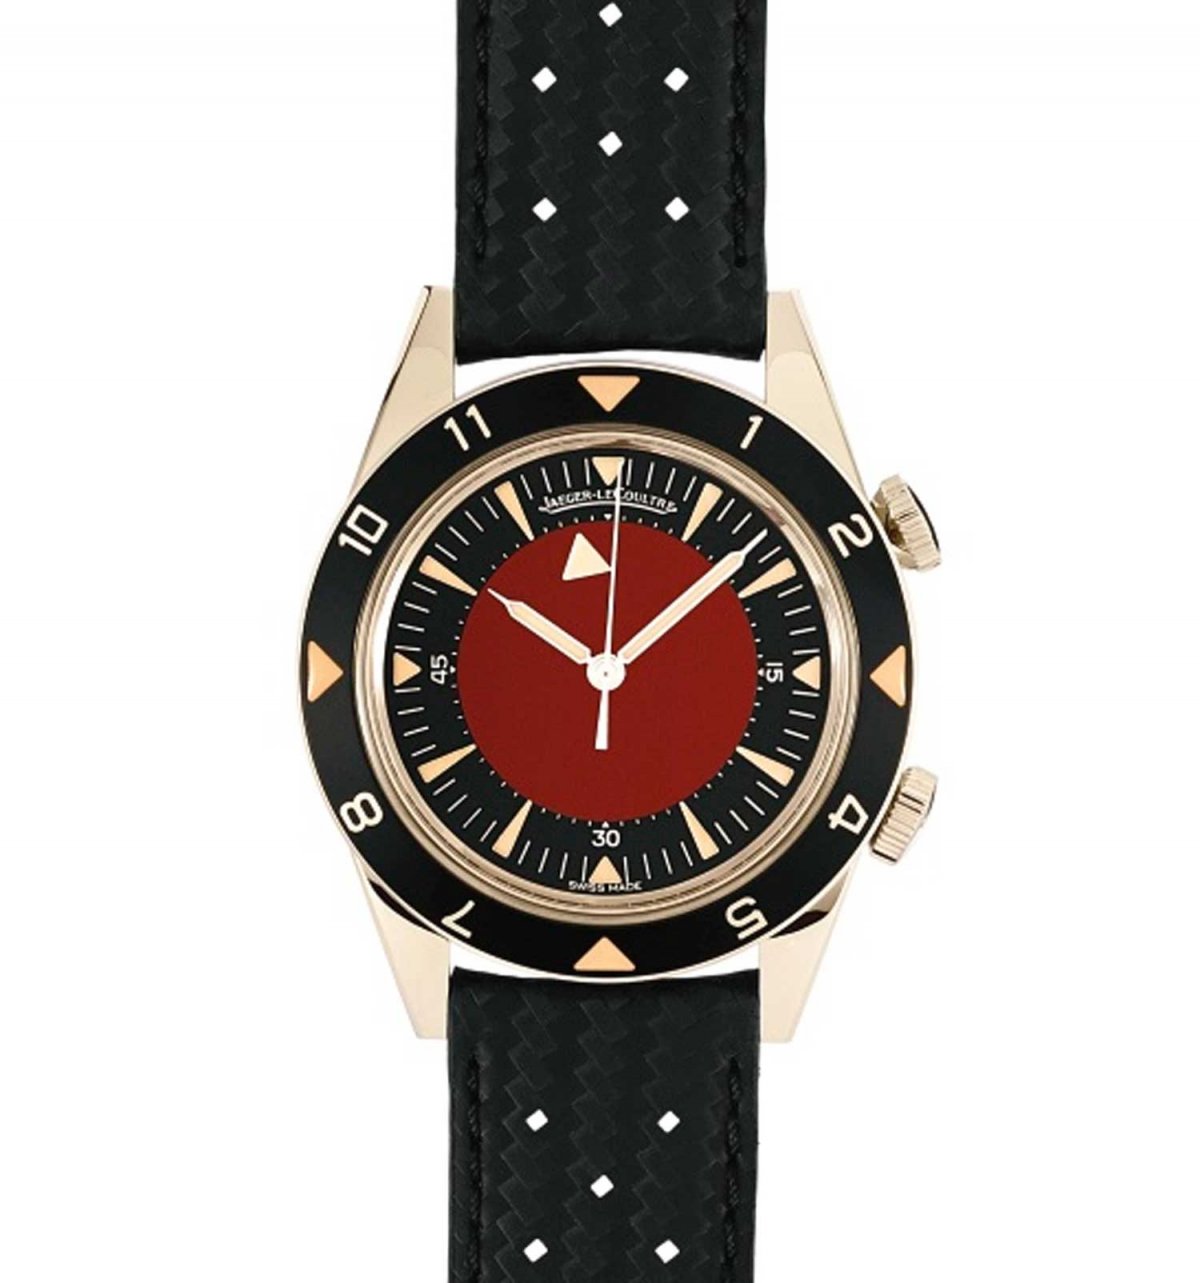 He also designed this Jaeger-LeCoultre watch for an AIDS charity auction.